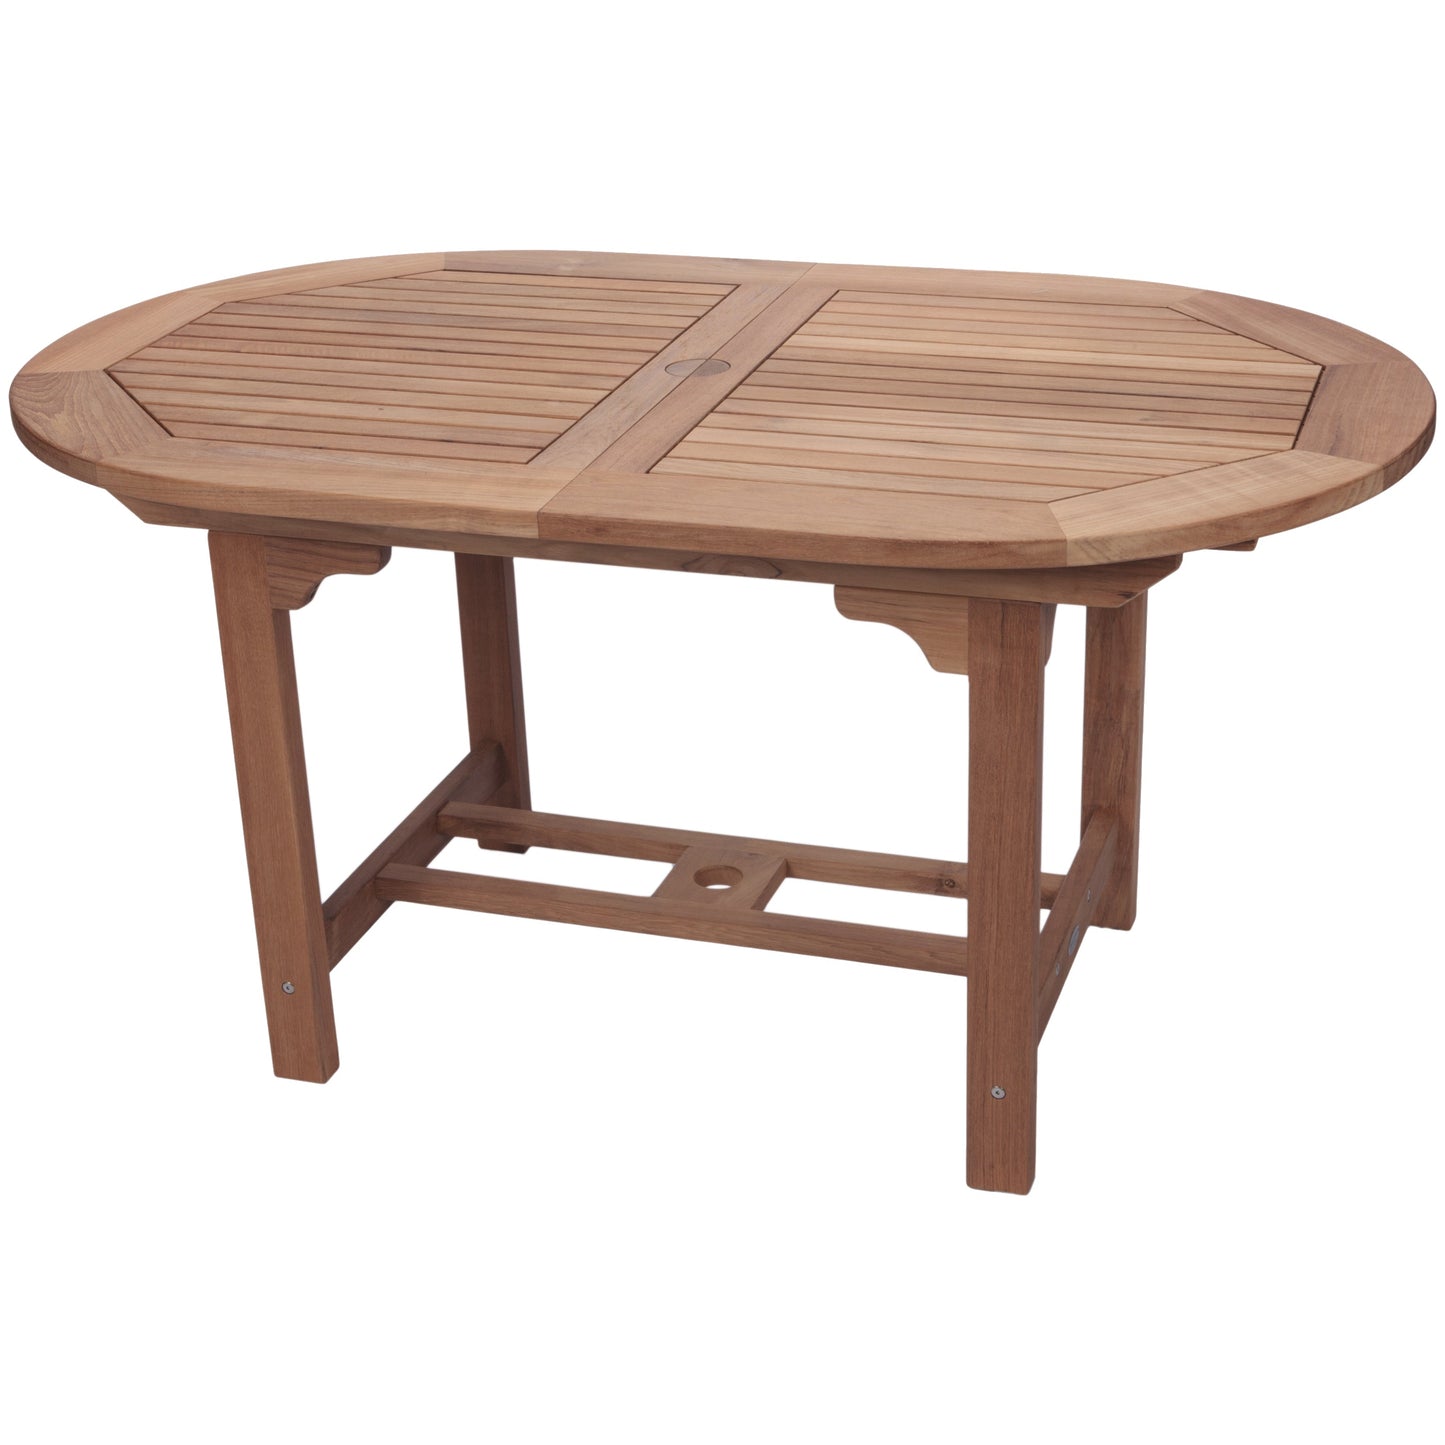 Family 60" (Expandable to 78") Oval Teak Dining Table